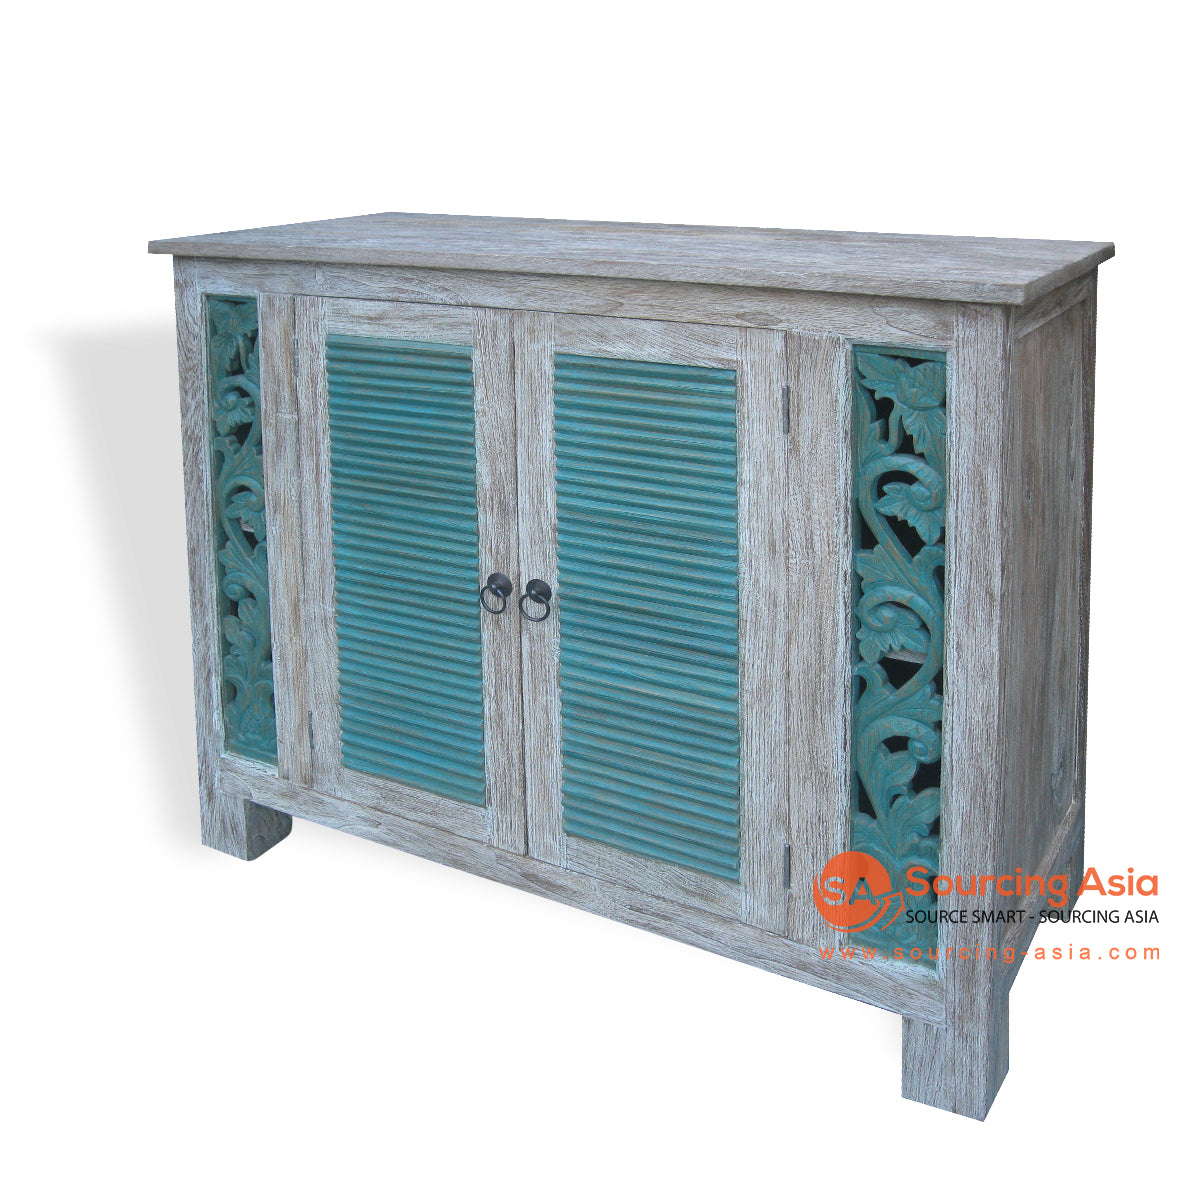 KYT50043 WHITE WASH RECYCLED TEAK WOOD TWO LOUVER DOORS CARVED CABINET